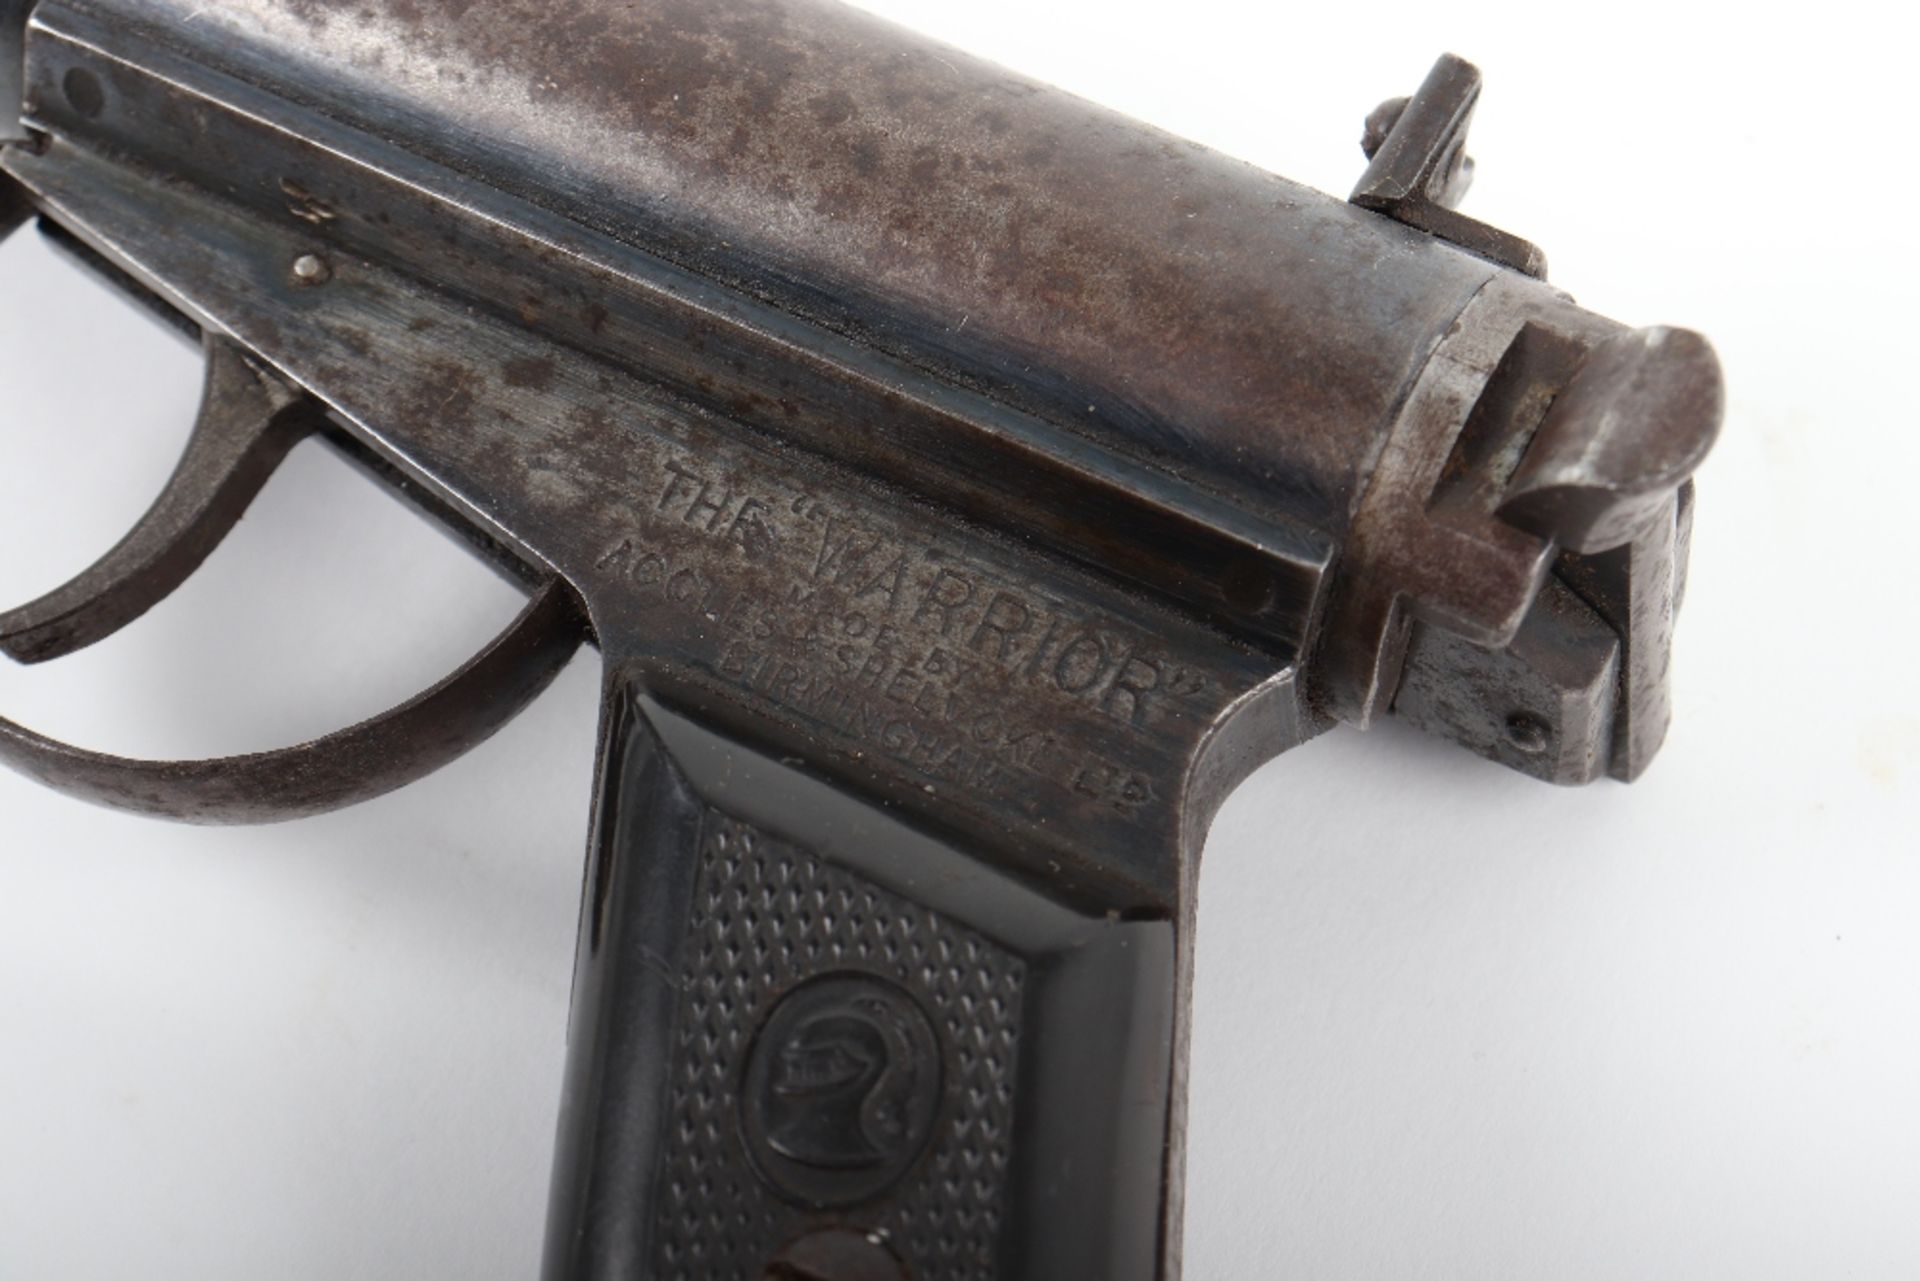 Scarce .22” Warrior Side-Lever Cocking Air Pistol No. 1921 - Image 7 of 8